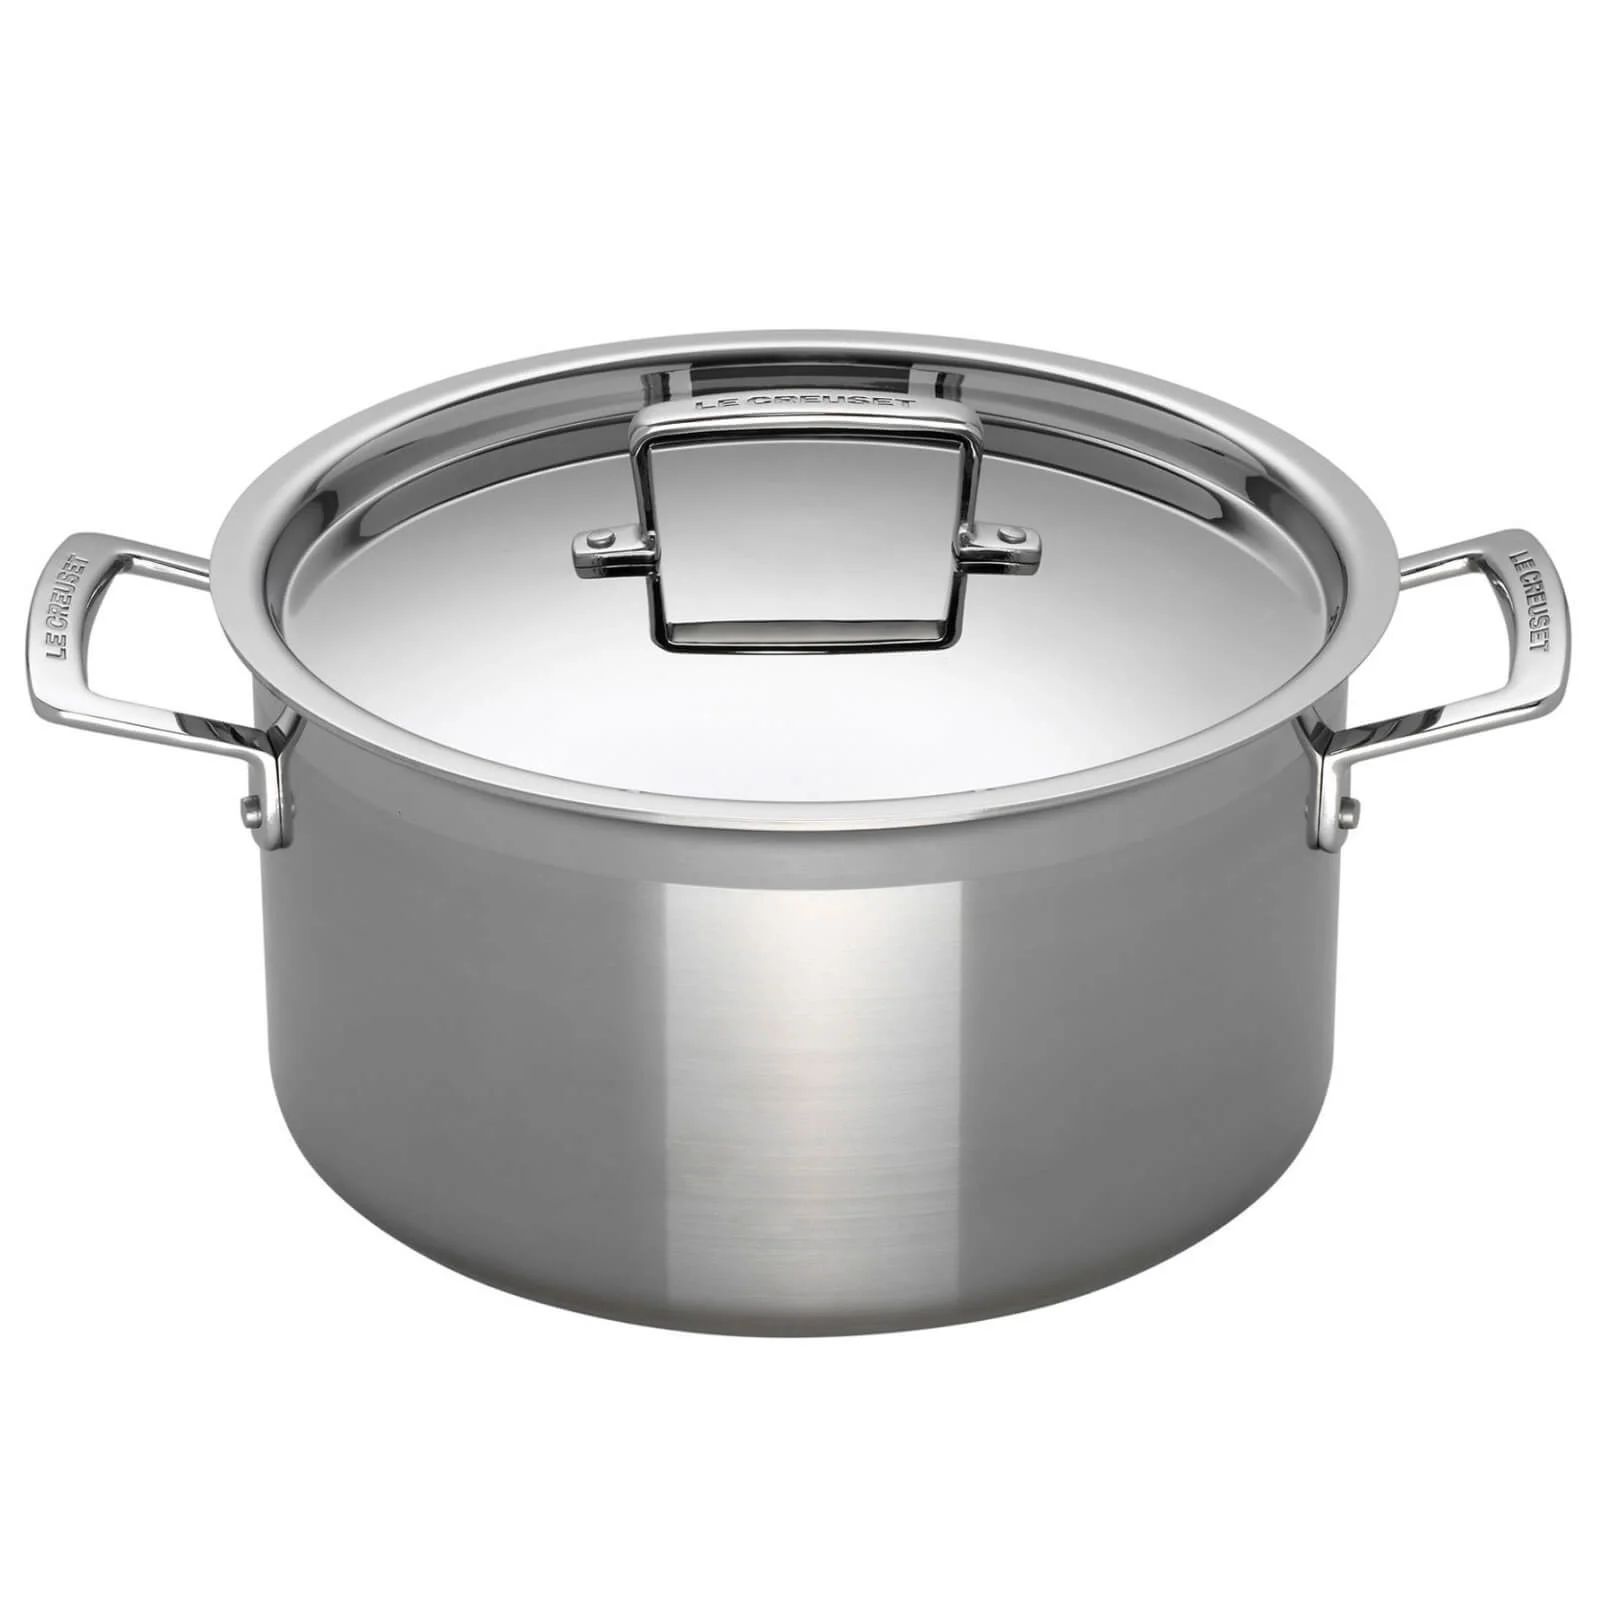 Le Creuset 3-Ply Stainless Steel Deep Casserole Dish - 24cm Image 1